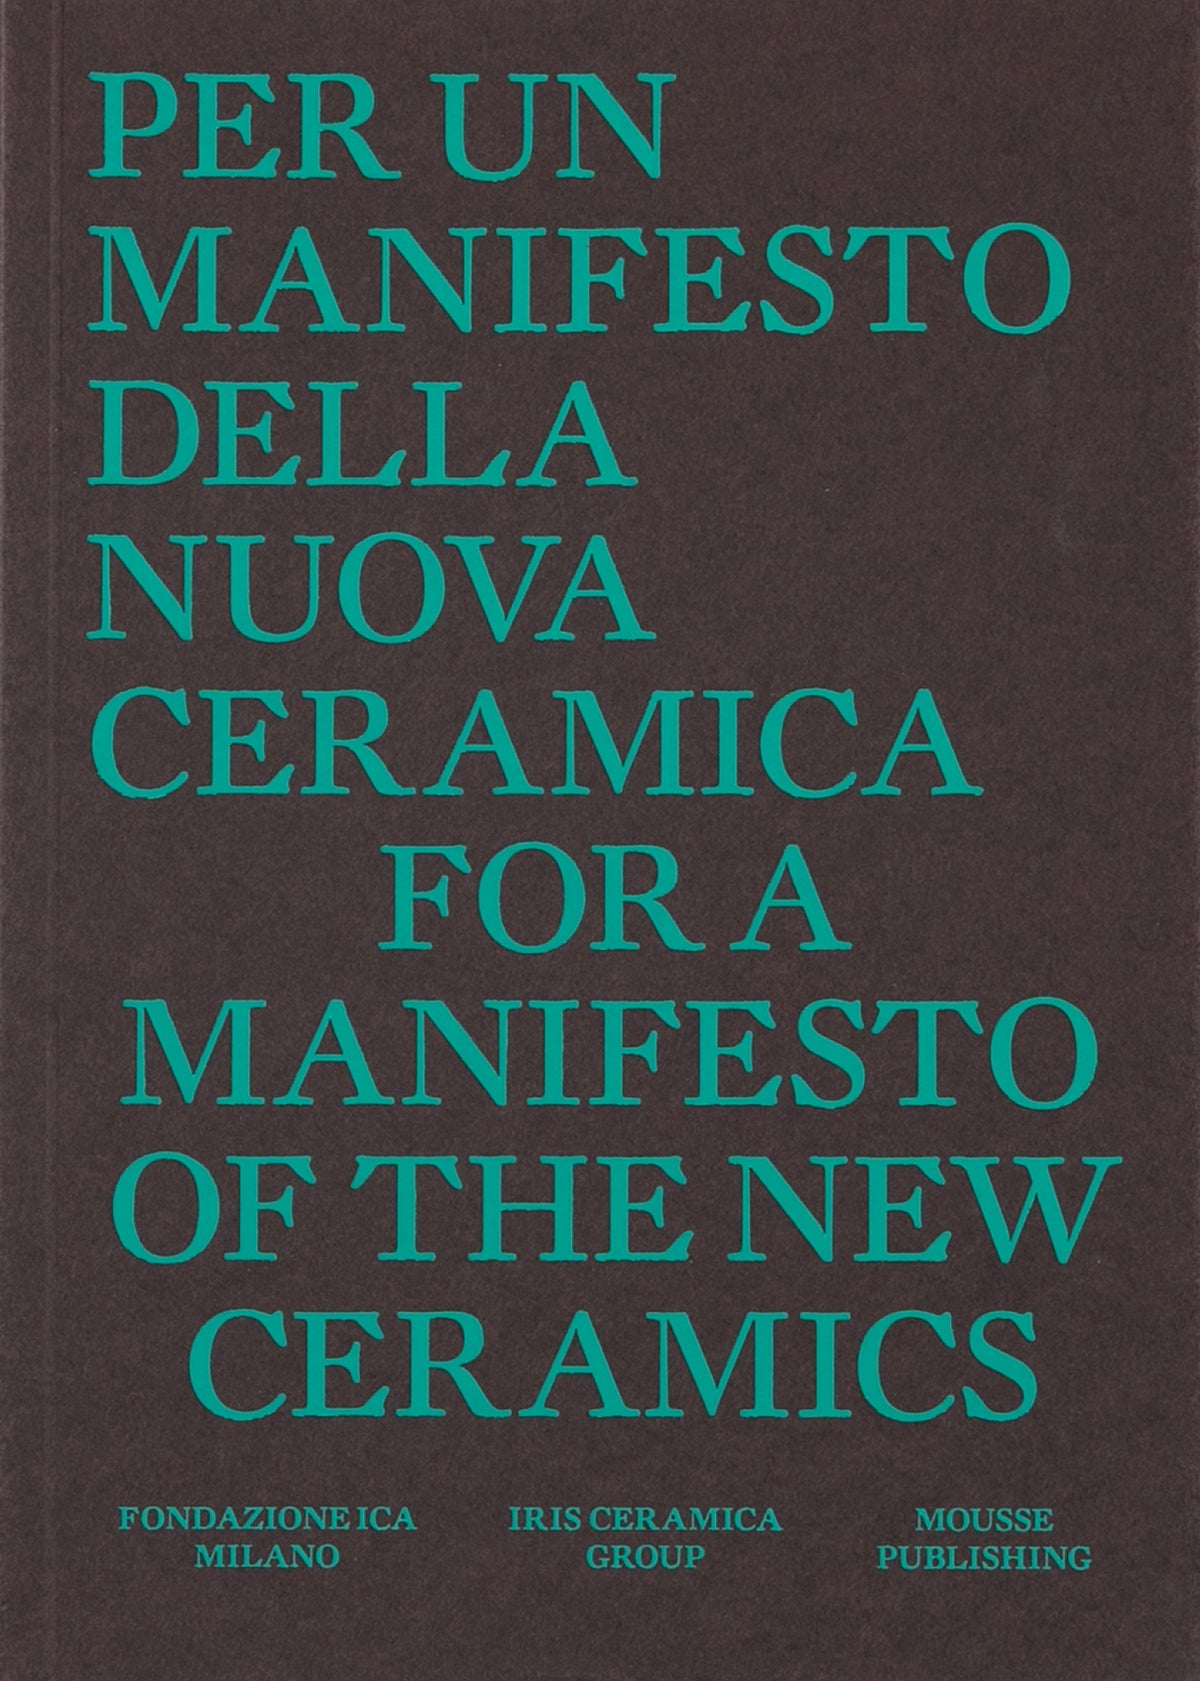 For a Manifesto of the New Ceramics